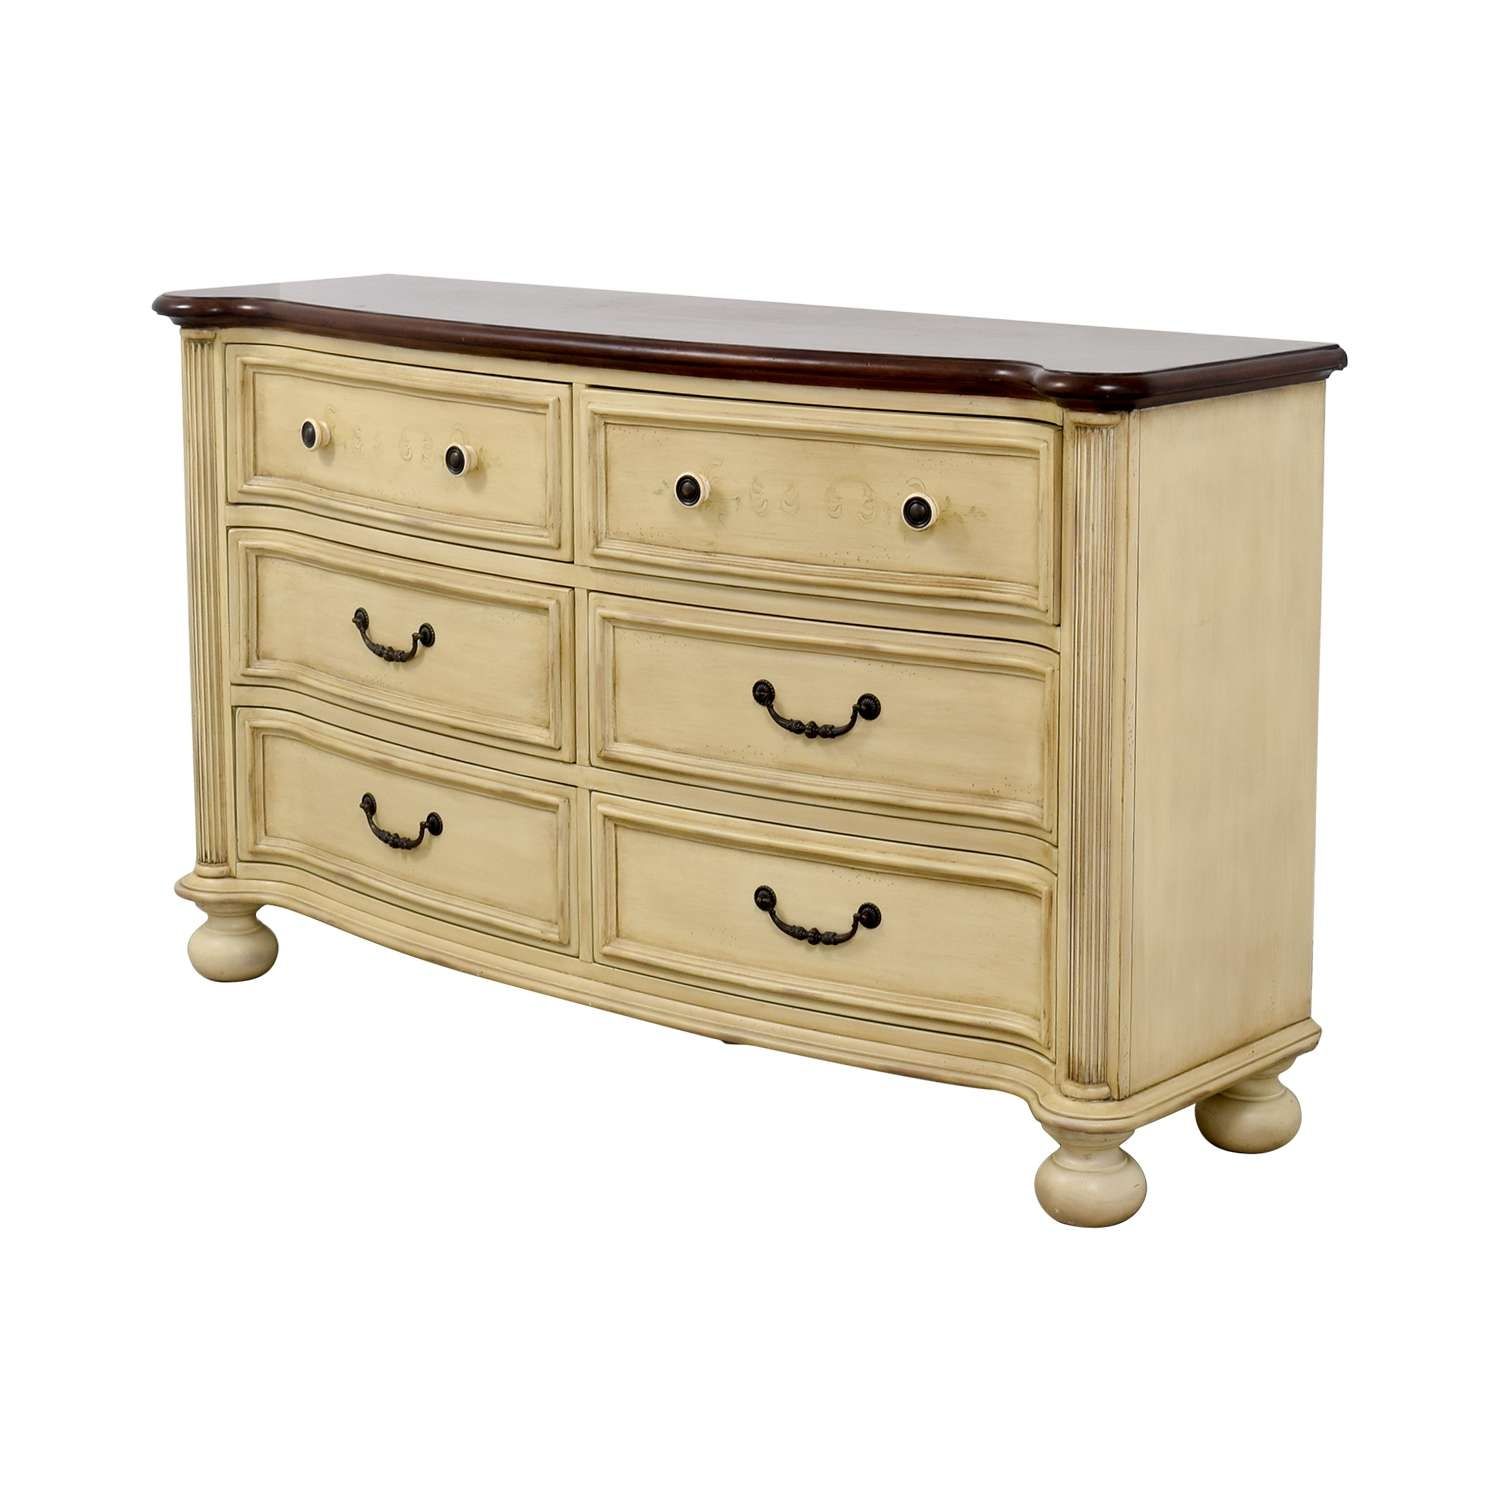 67% Off – Hooker Furniture Hooker Furniture Six Drawer Dresser Throughout Second Hand Dressers And Sideboards (View 6 of 20)